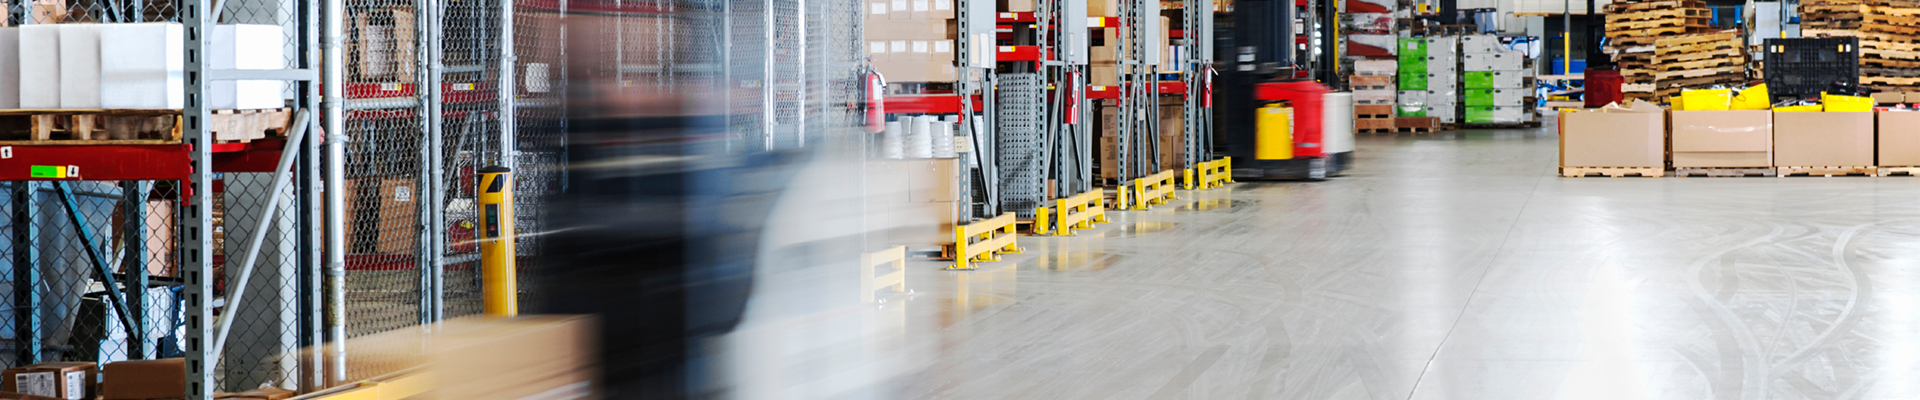 How to Run an Accident-Free Warehouse